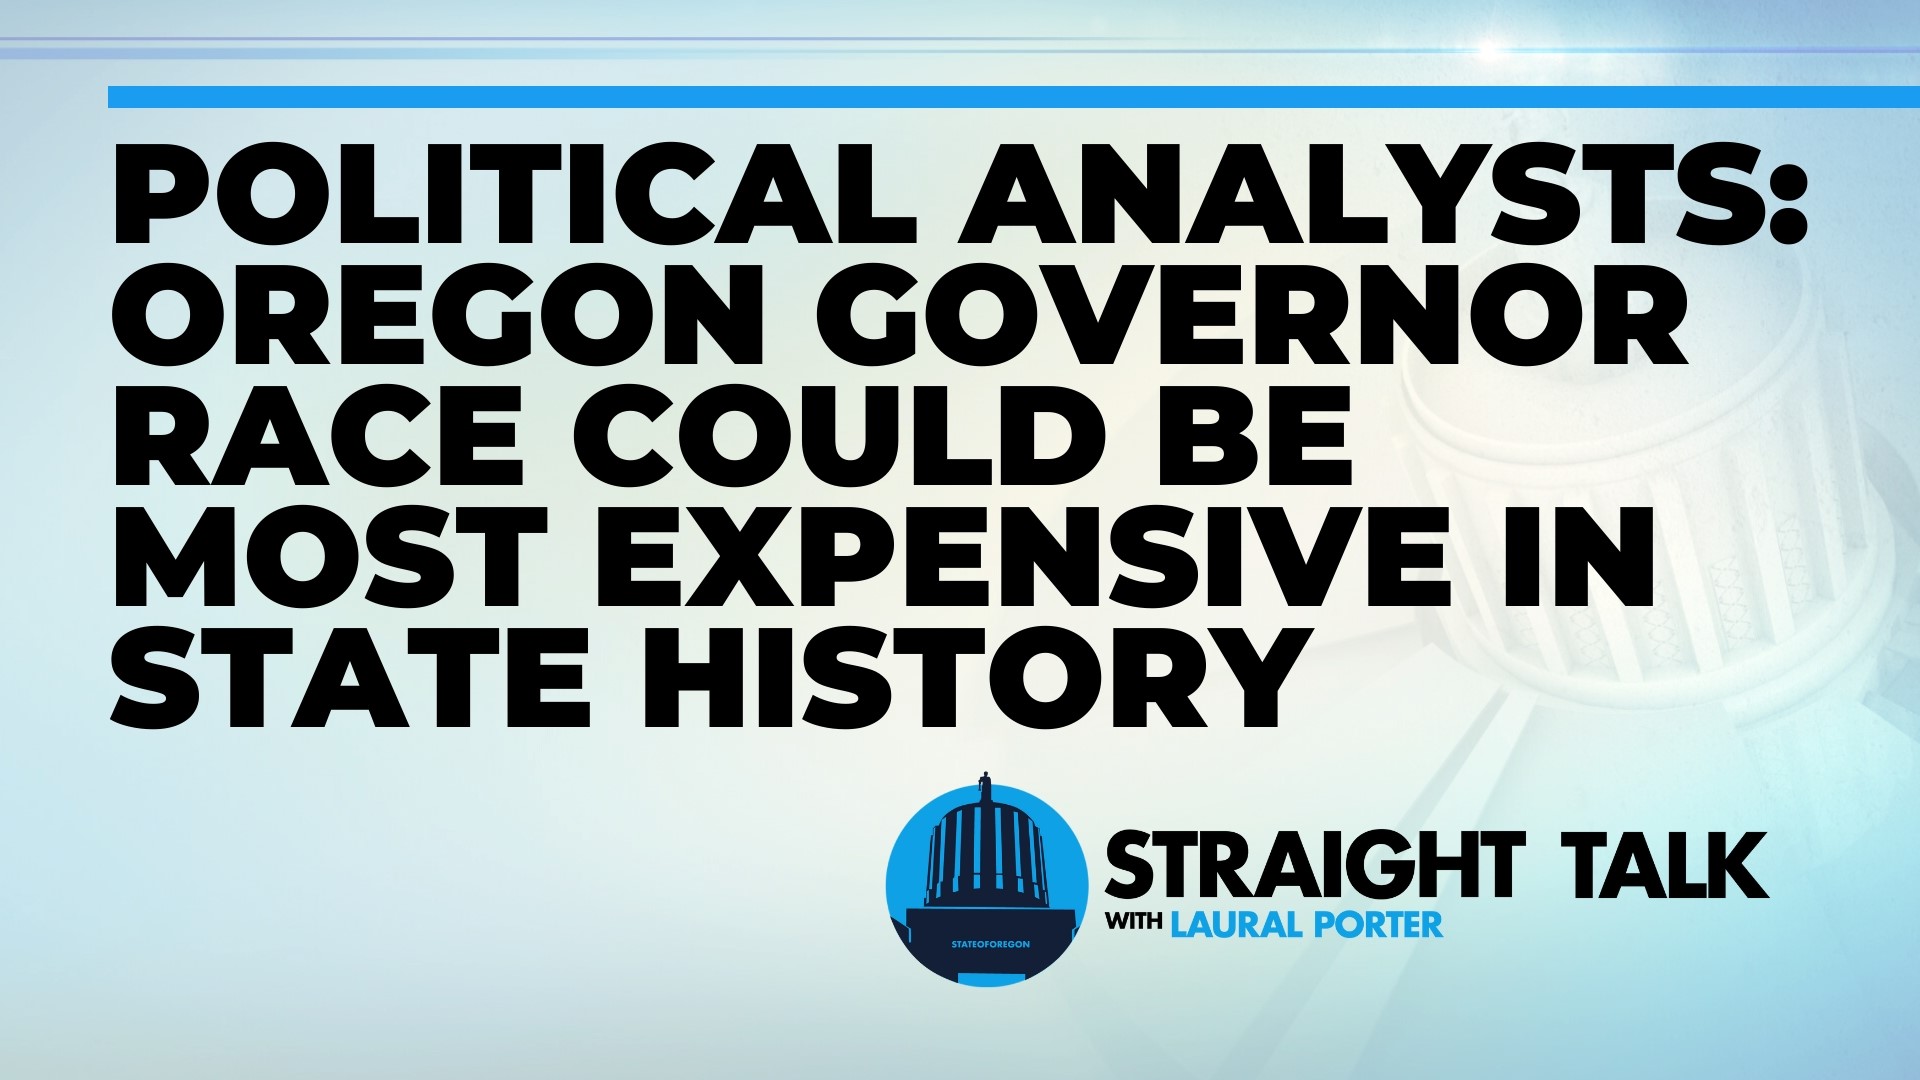 KGW political analyst Len Bergstein and Republican strategist Rebecca Tweet break down what they predict will be the most expensive governor's race in state history.